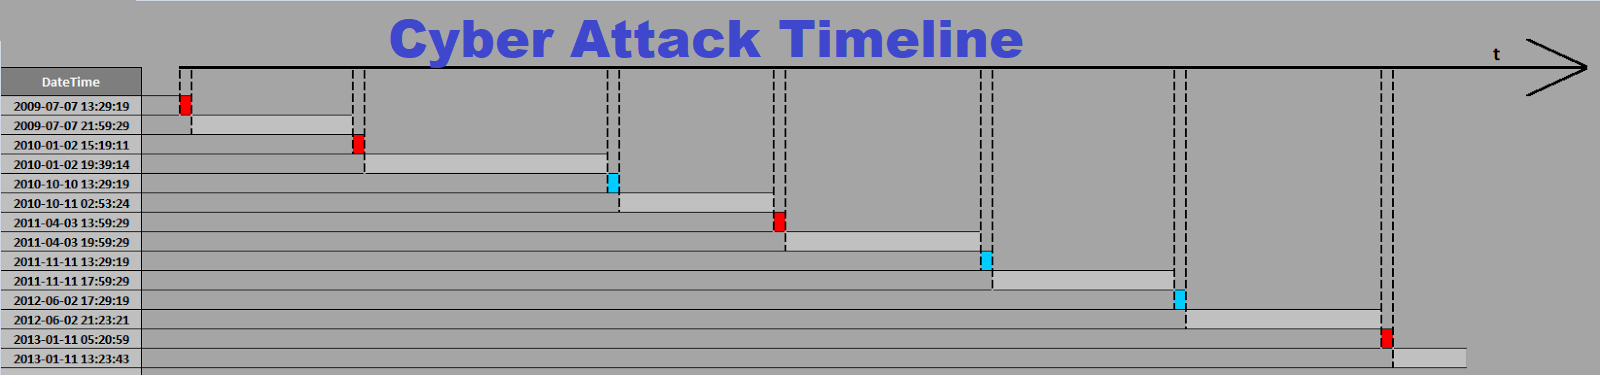 Cyber Attach Timeline